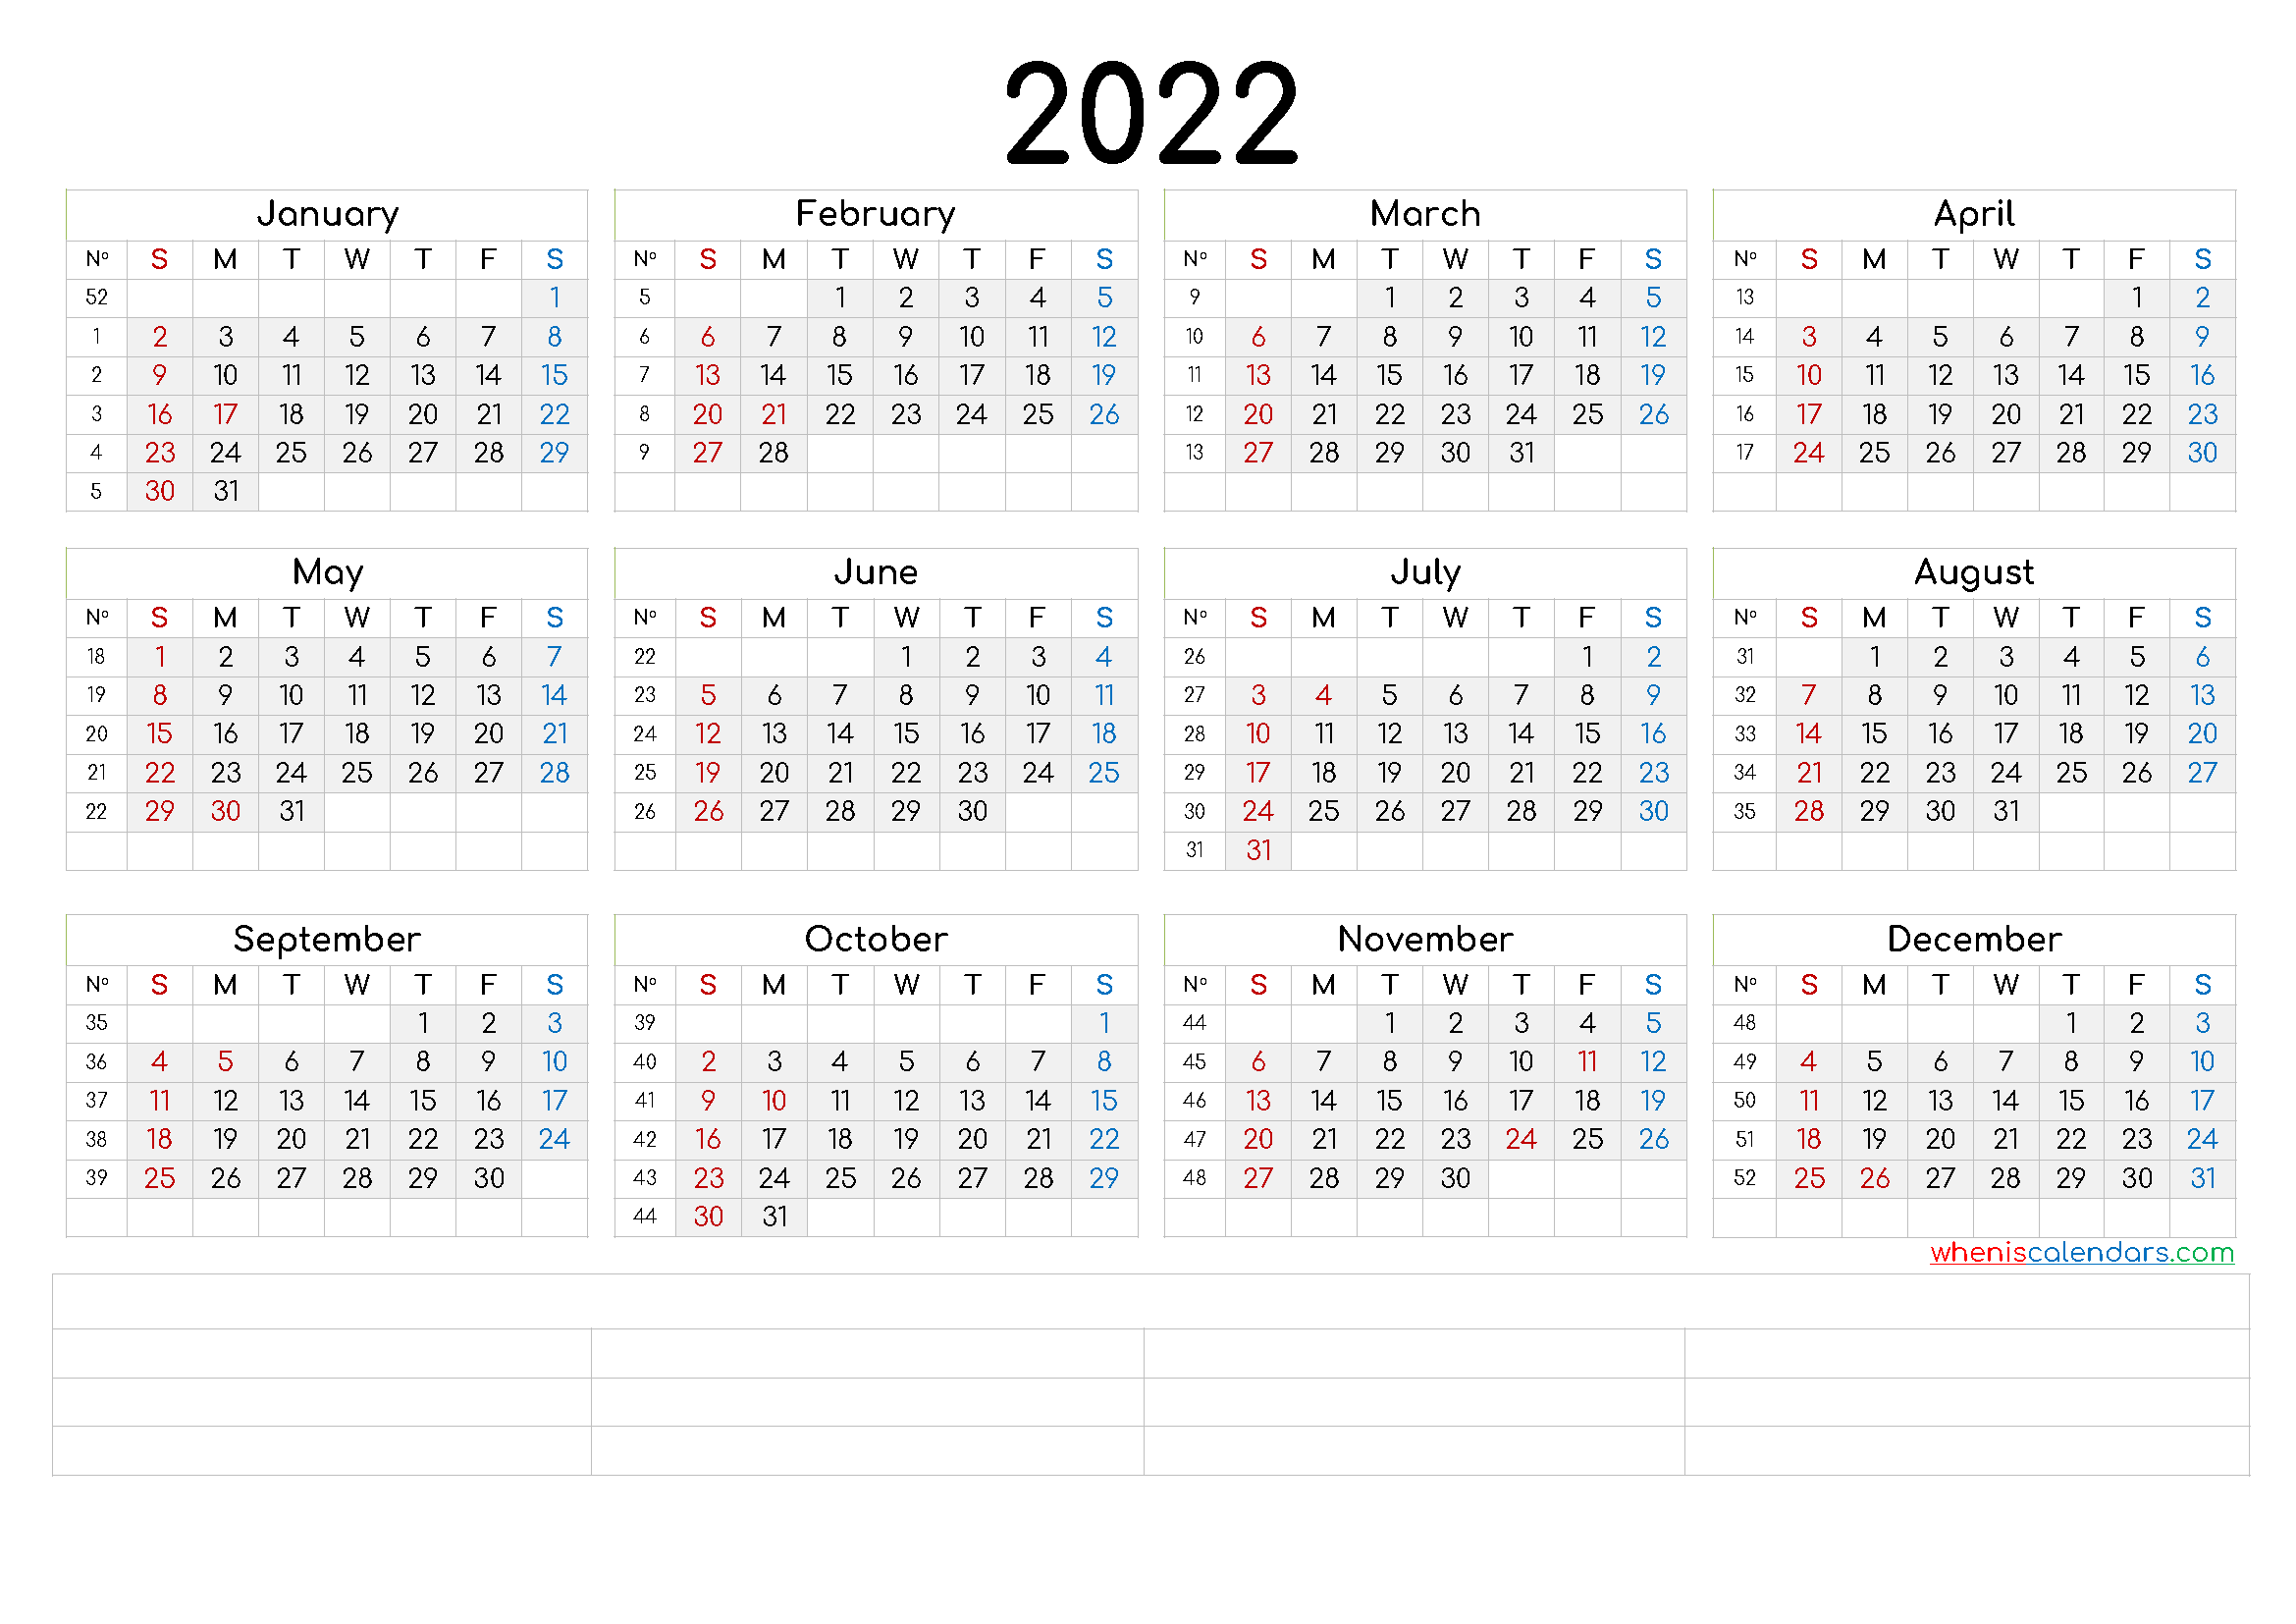 2022-calendar-with-week-numbers-and-holidays-for-united-2022-year-at-a-glance-calendar